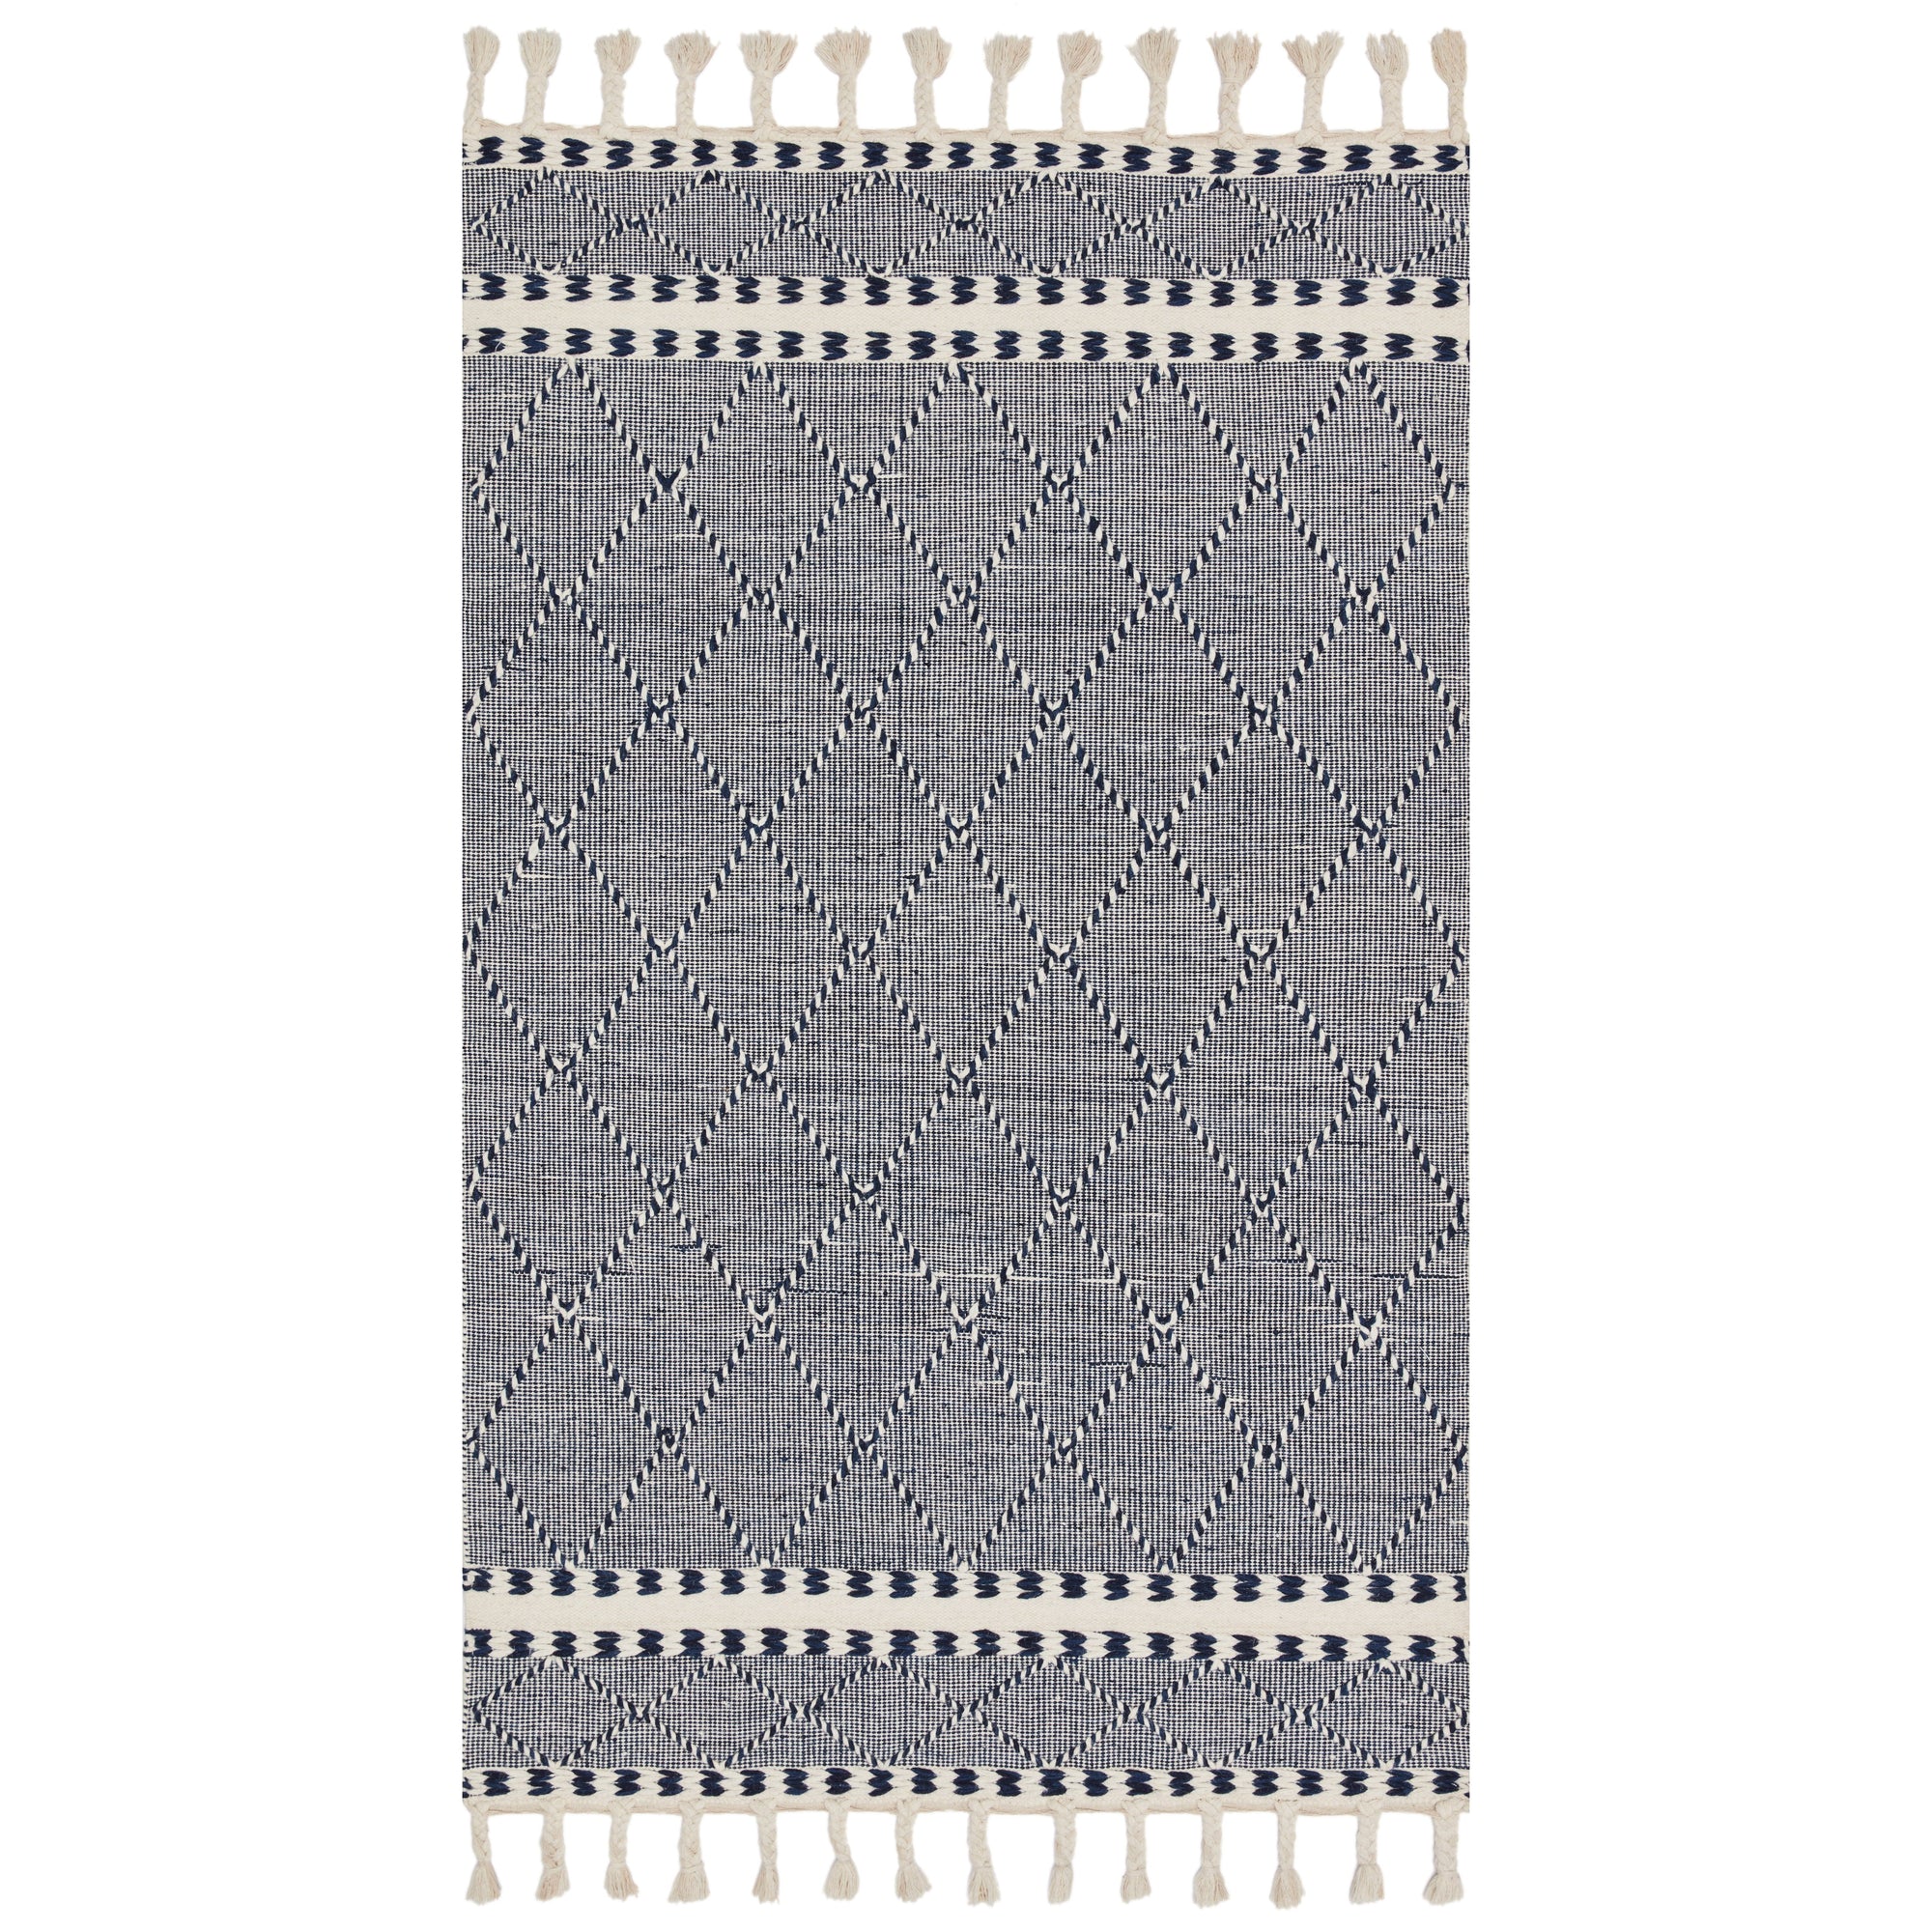 Rugs by Roo Loloi Sawyer Navy Area Rug in size 18" x 18" Sample